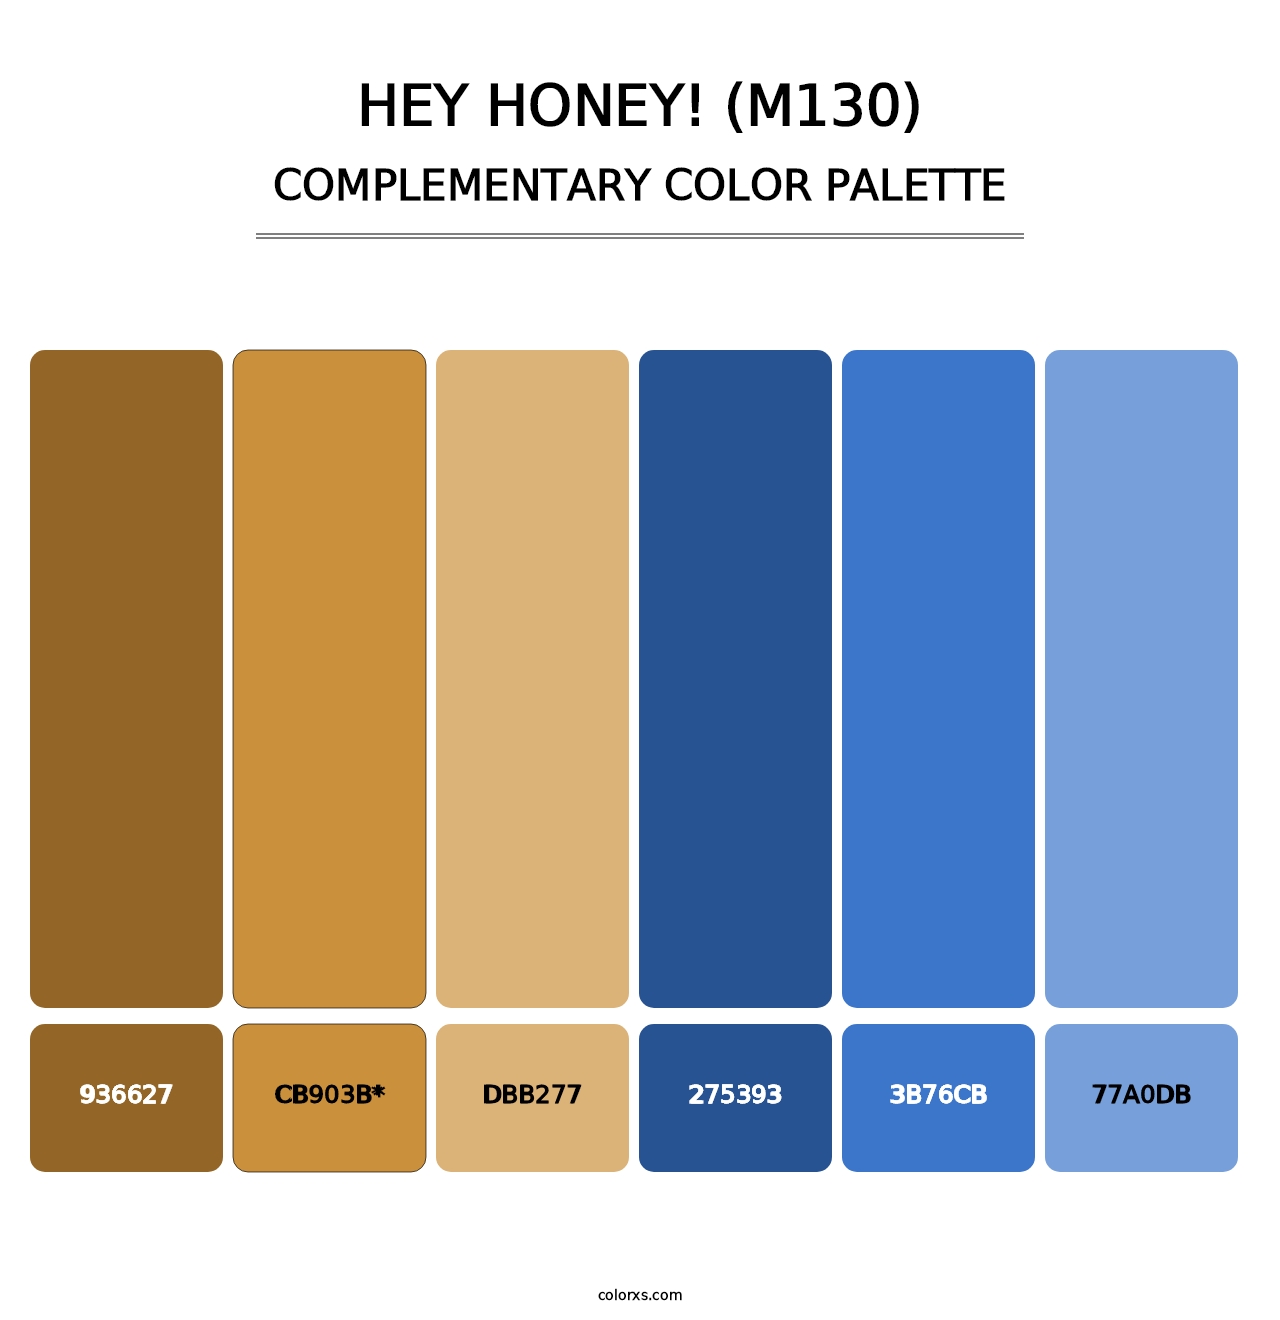 Hey Honey! (M130) - Complementary Color Palette